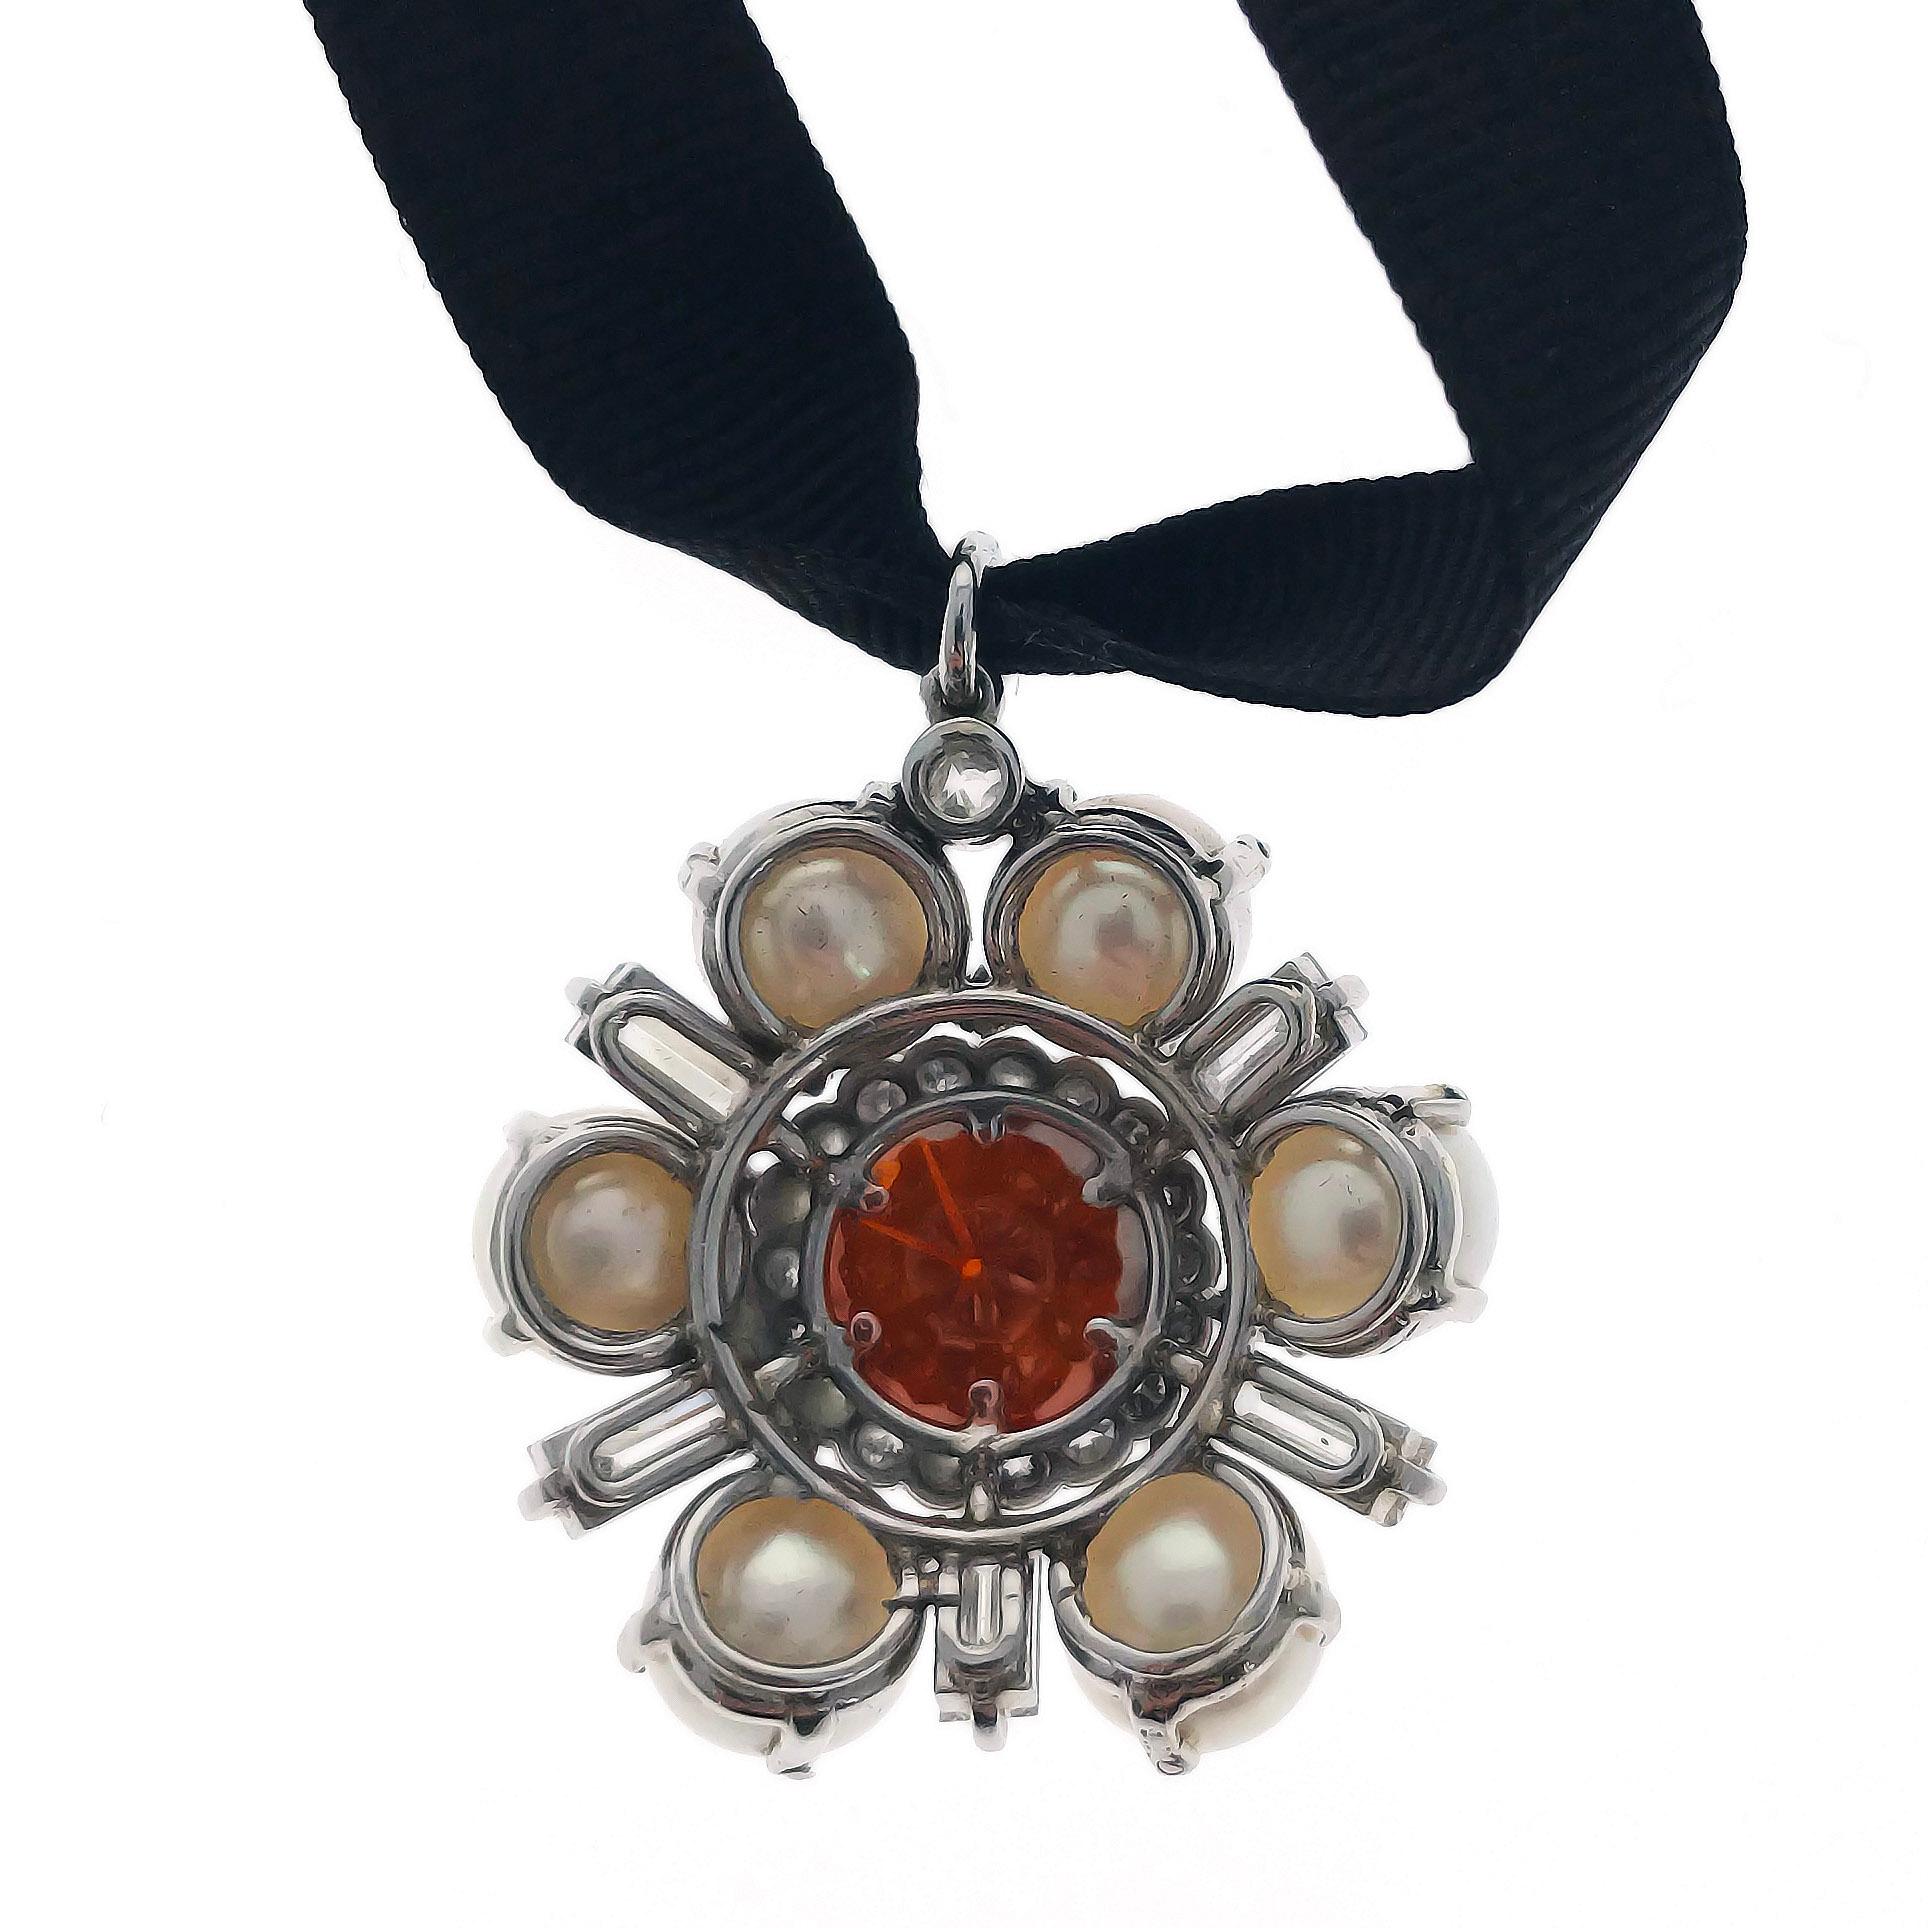 This unique pendant with stylized flower motif, centers upon an HPHT treated orange brown diamond of 6.10 carats. It is encircled with a row of brilliant-cut diamonds, and bordered by alternating cultured pearls and baguette-cut diamonds. The